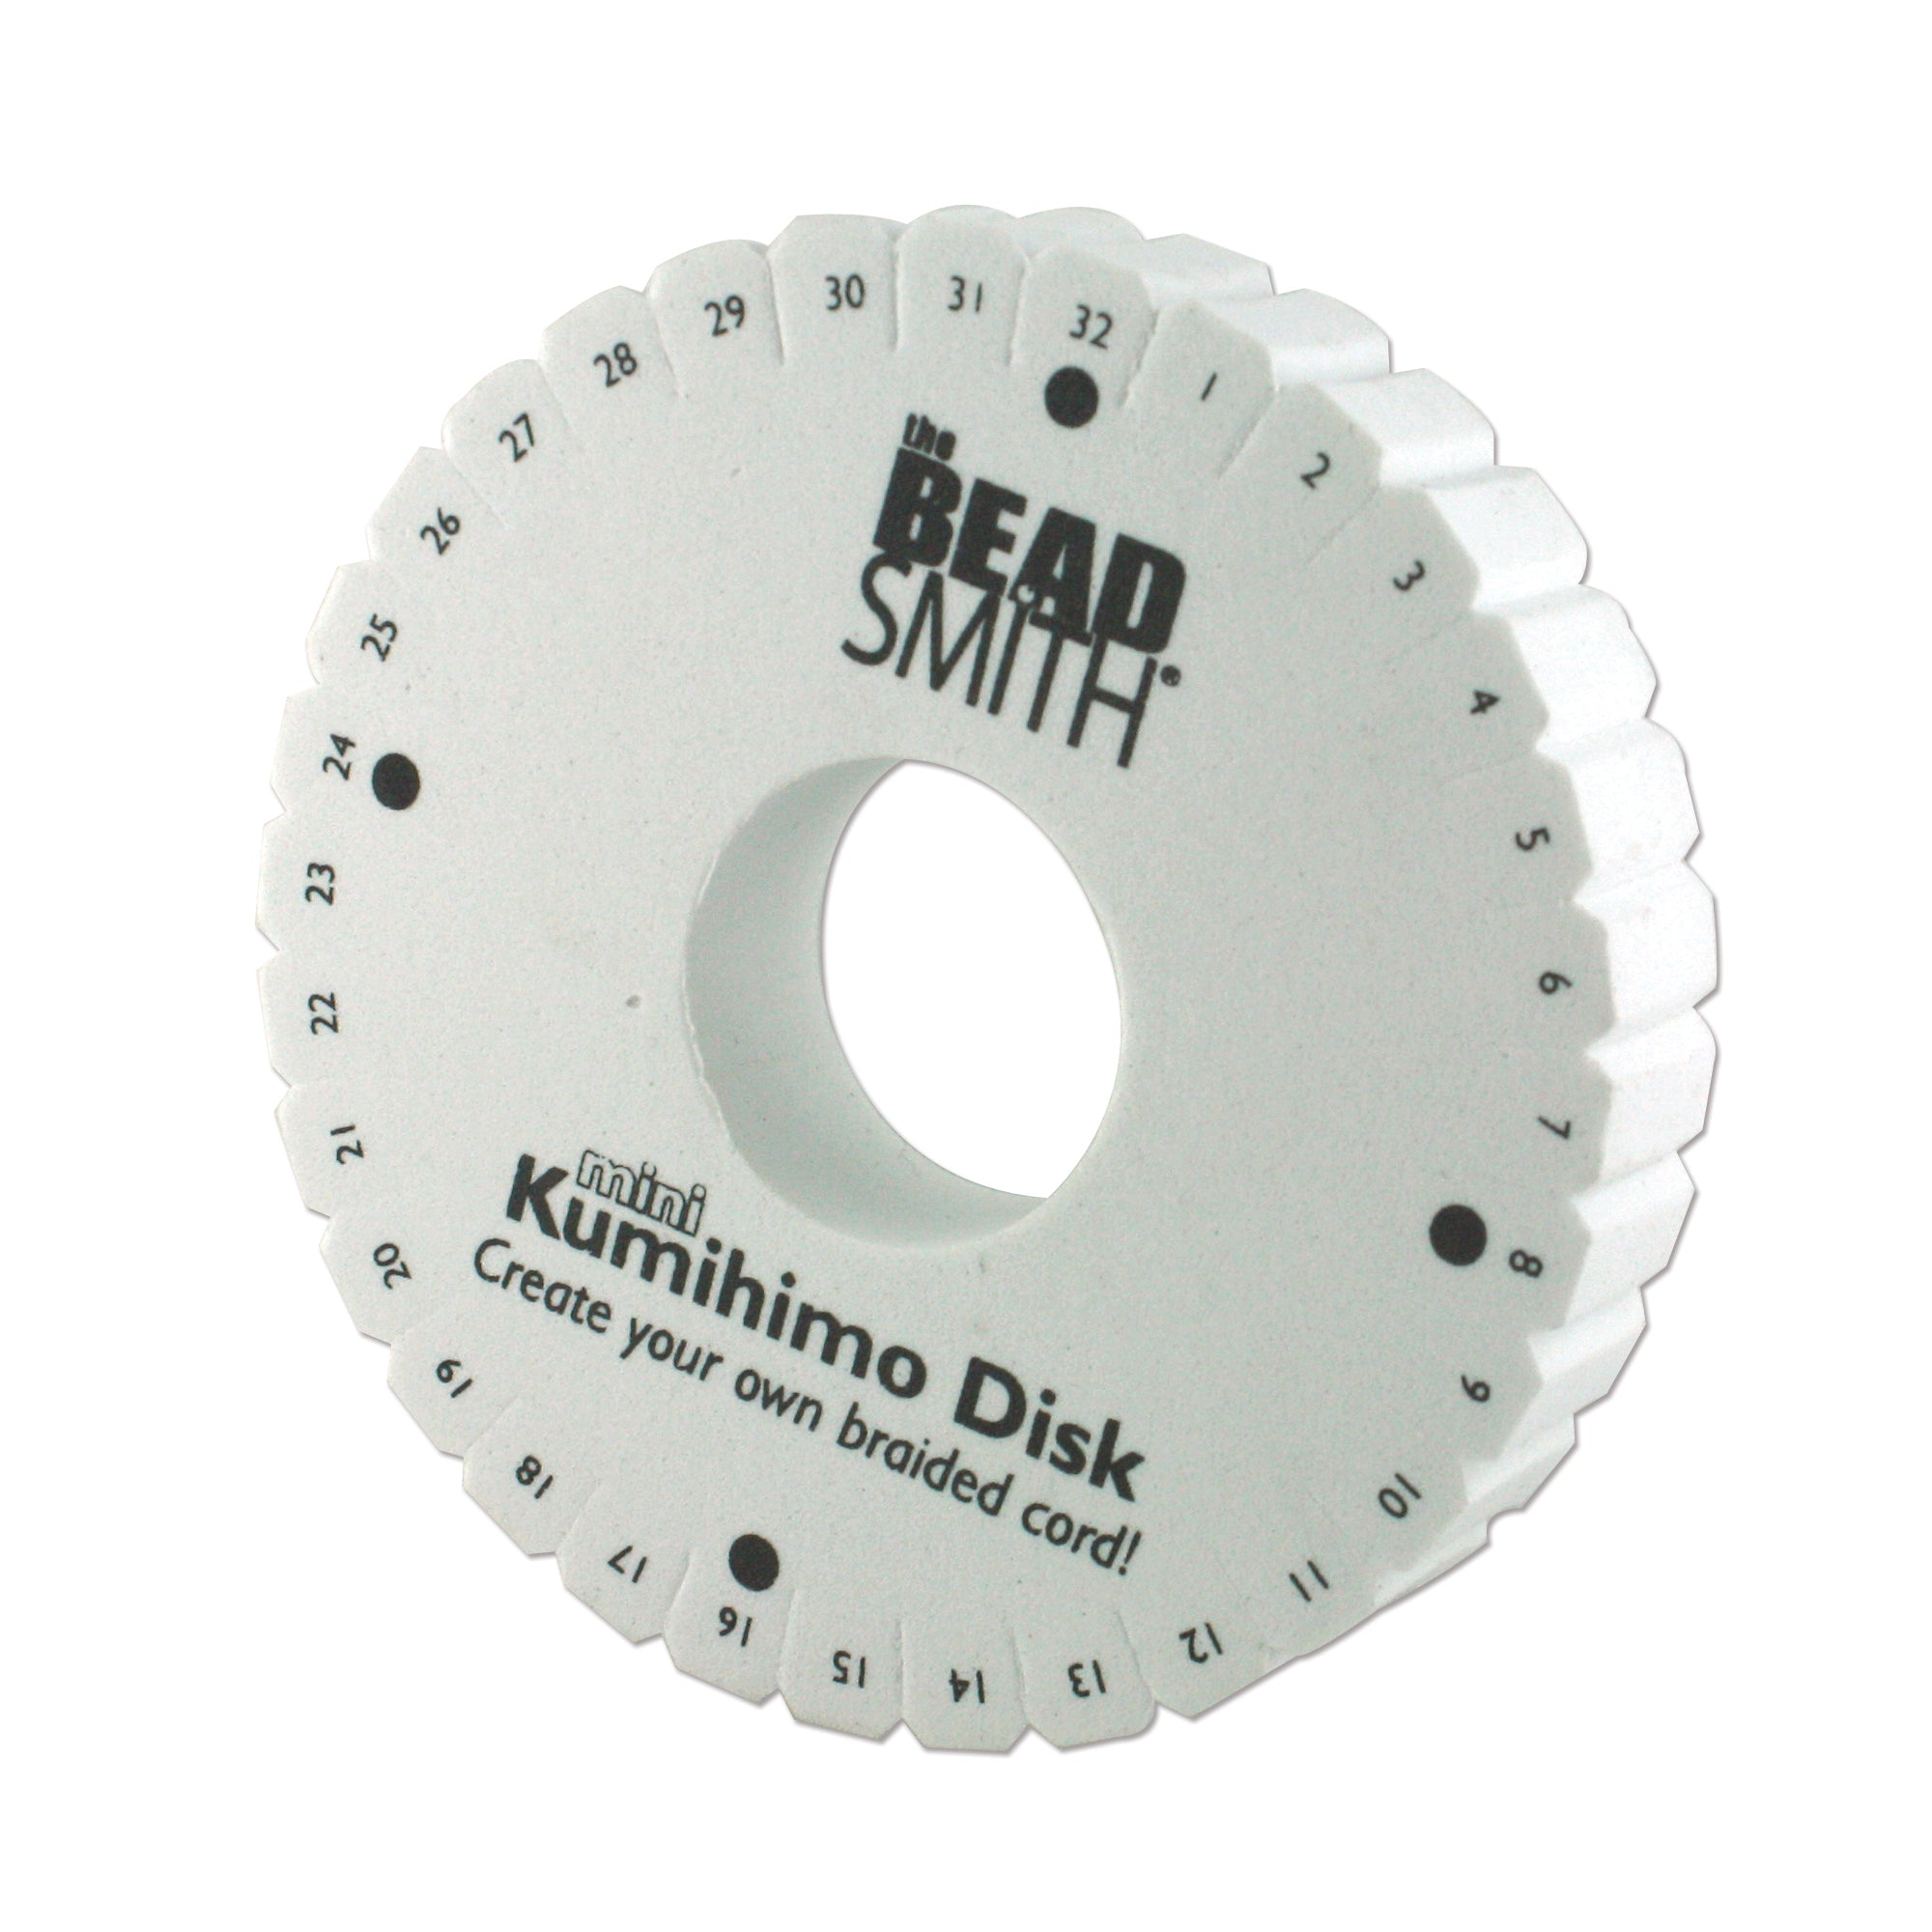 Double Density 4.25 In Round Kumihimo Disk - Soft Flex Company